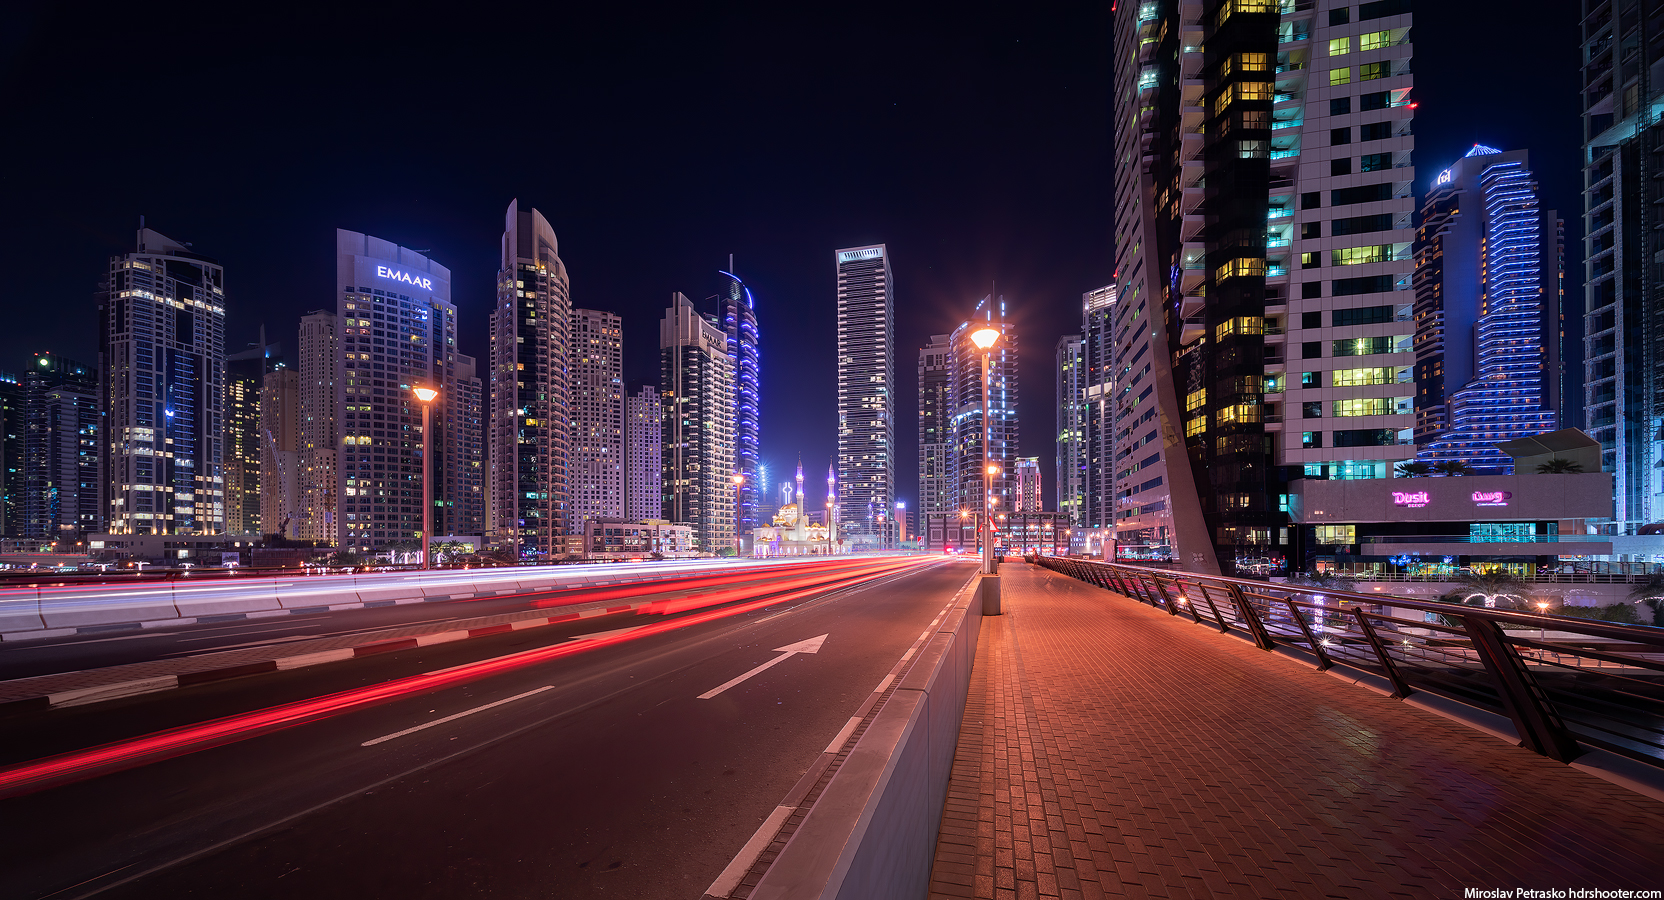 New Dubai super ultra-wide wallpapers - HDRshooter